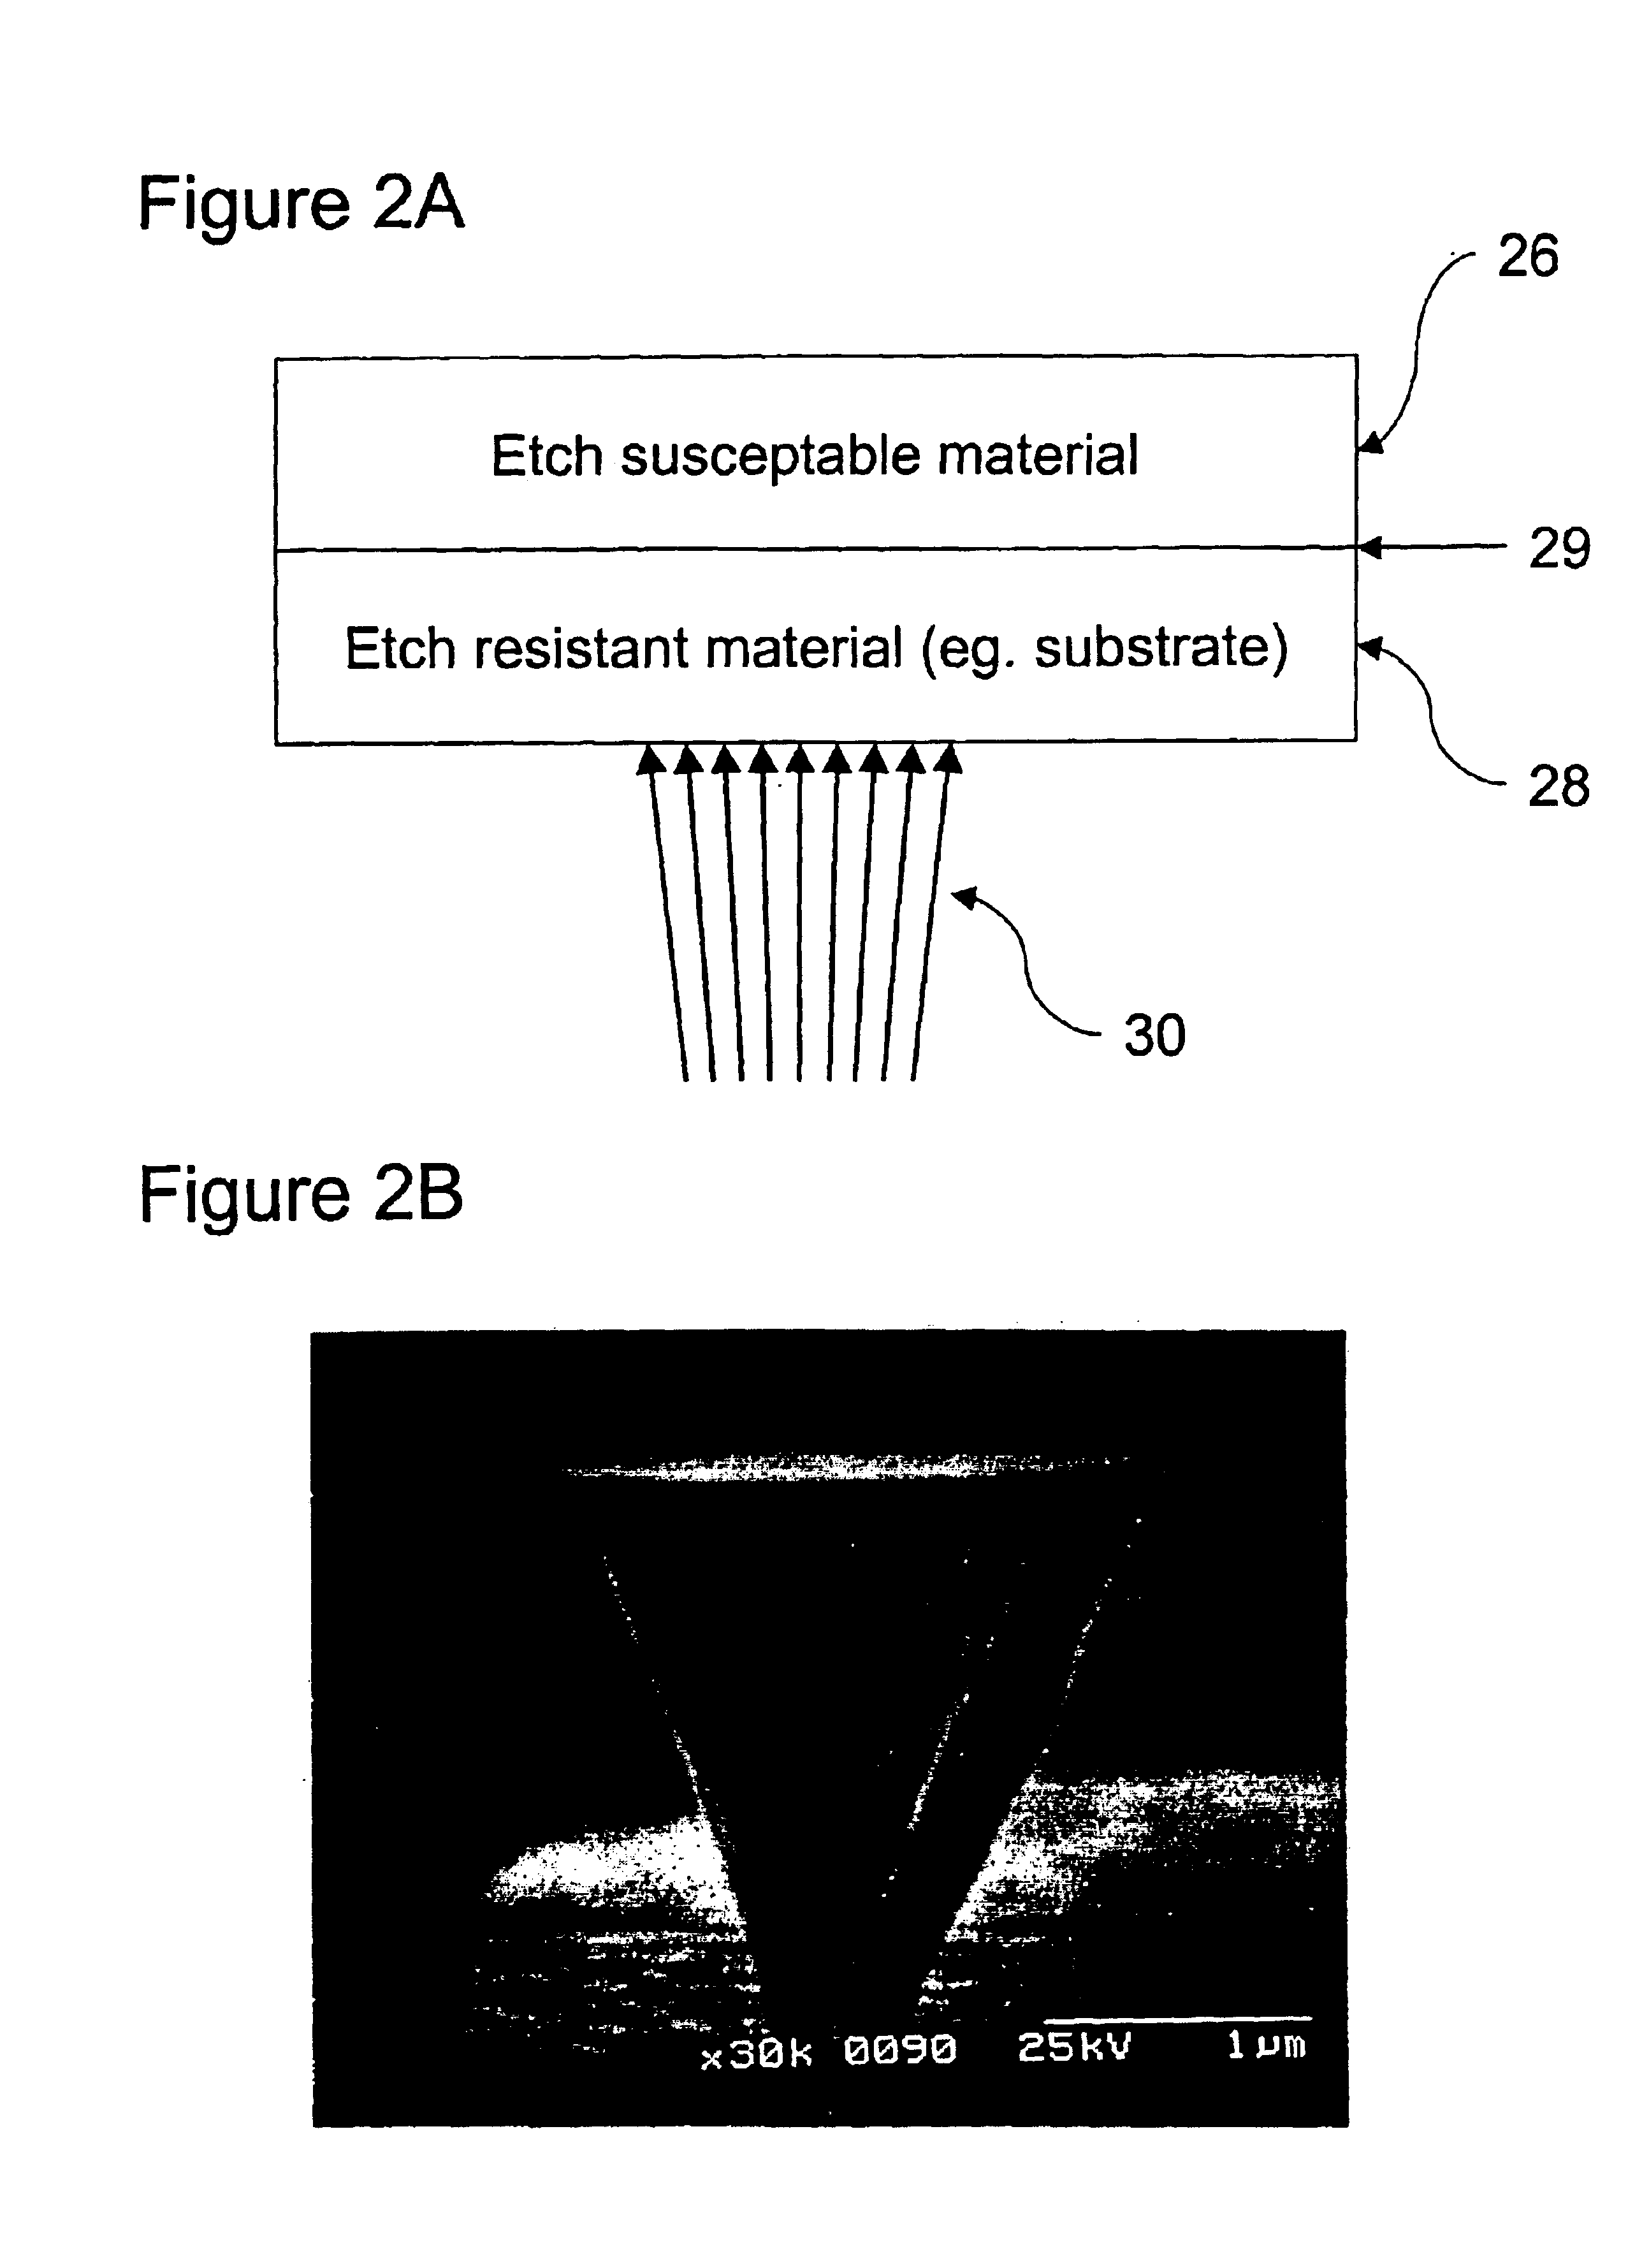 Photoelectrochemical undercut etching of semiconductor material